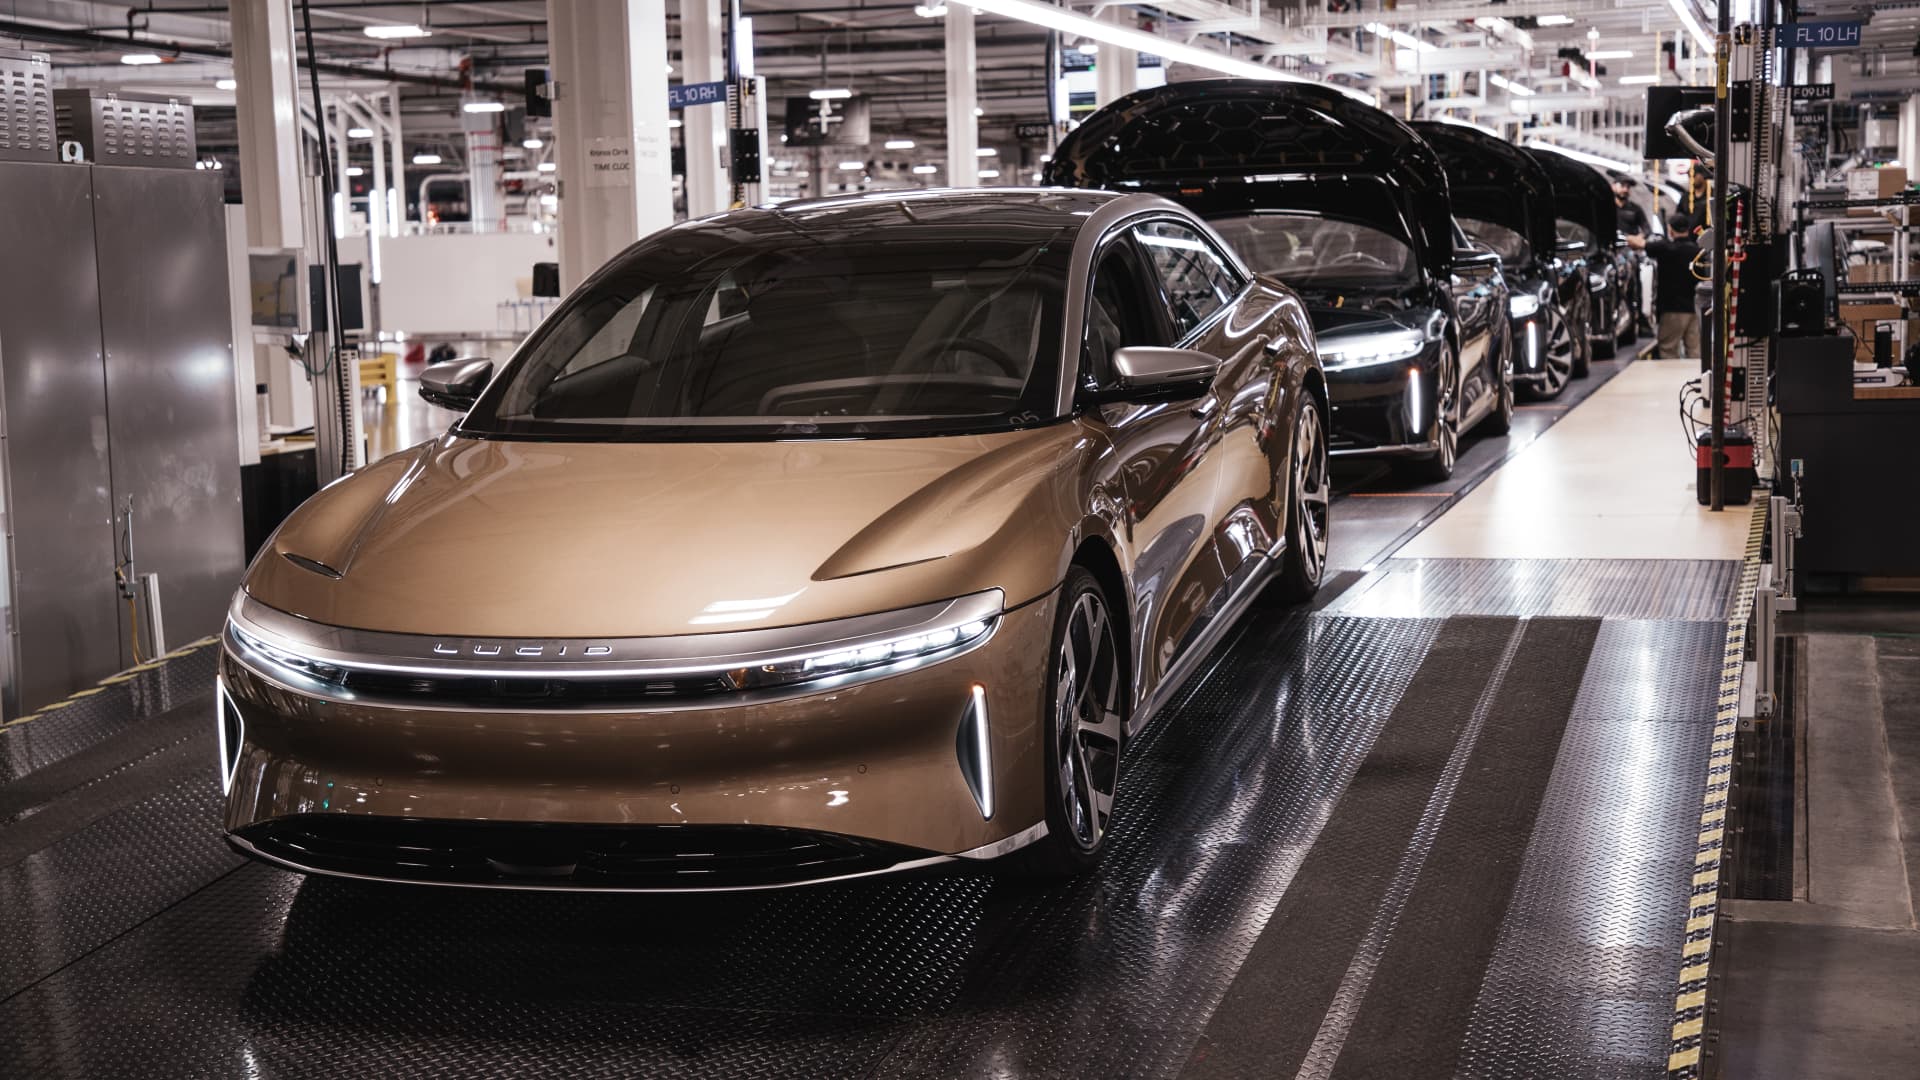 Luxury EV maker Lucid confirms it’s on track to meet conservative 2022 production targets Auto Recent